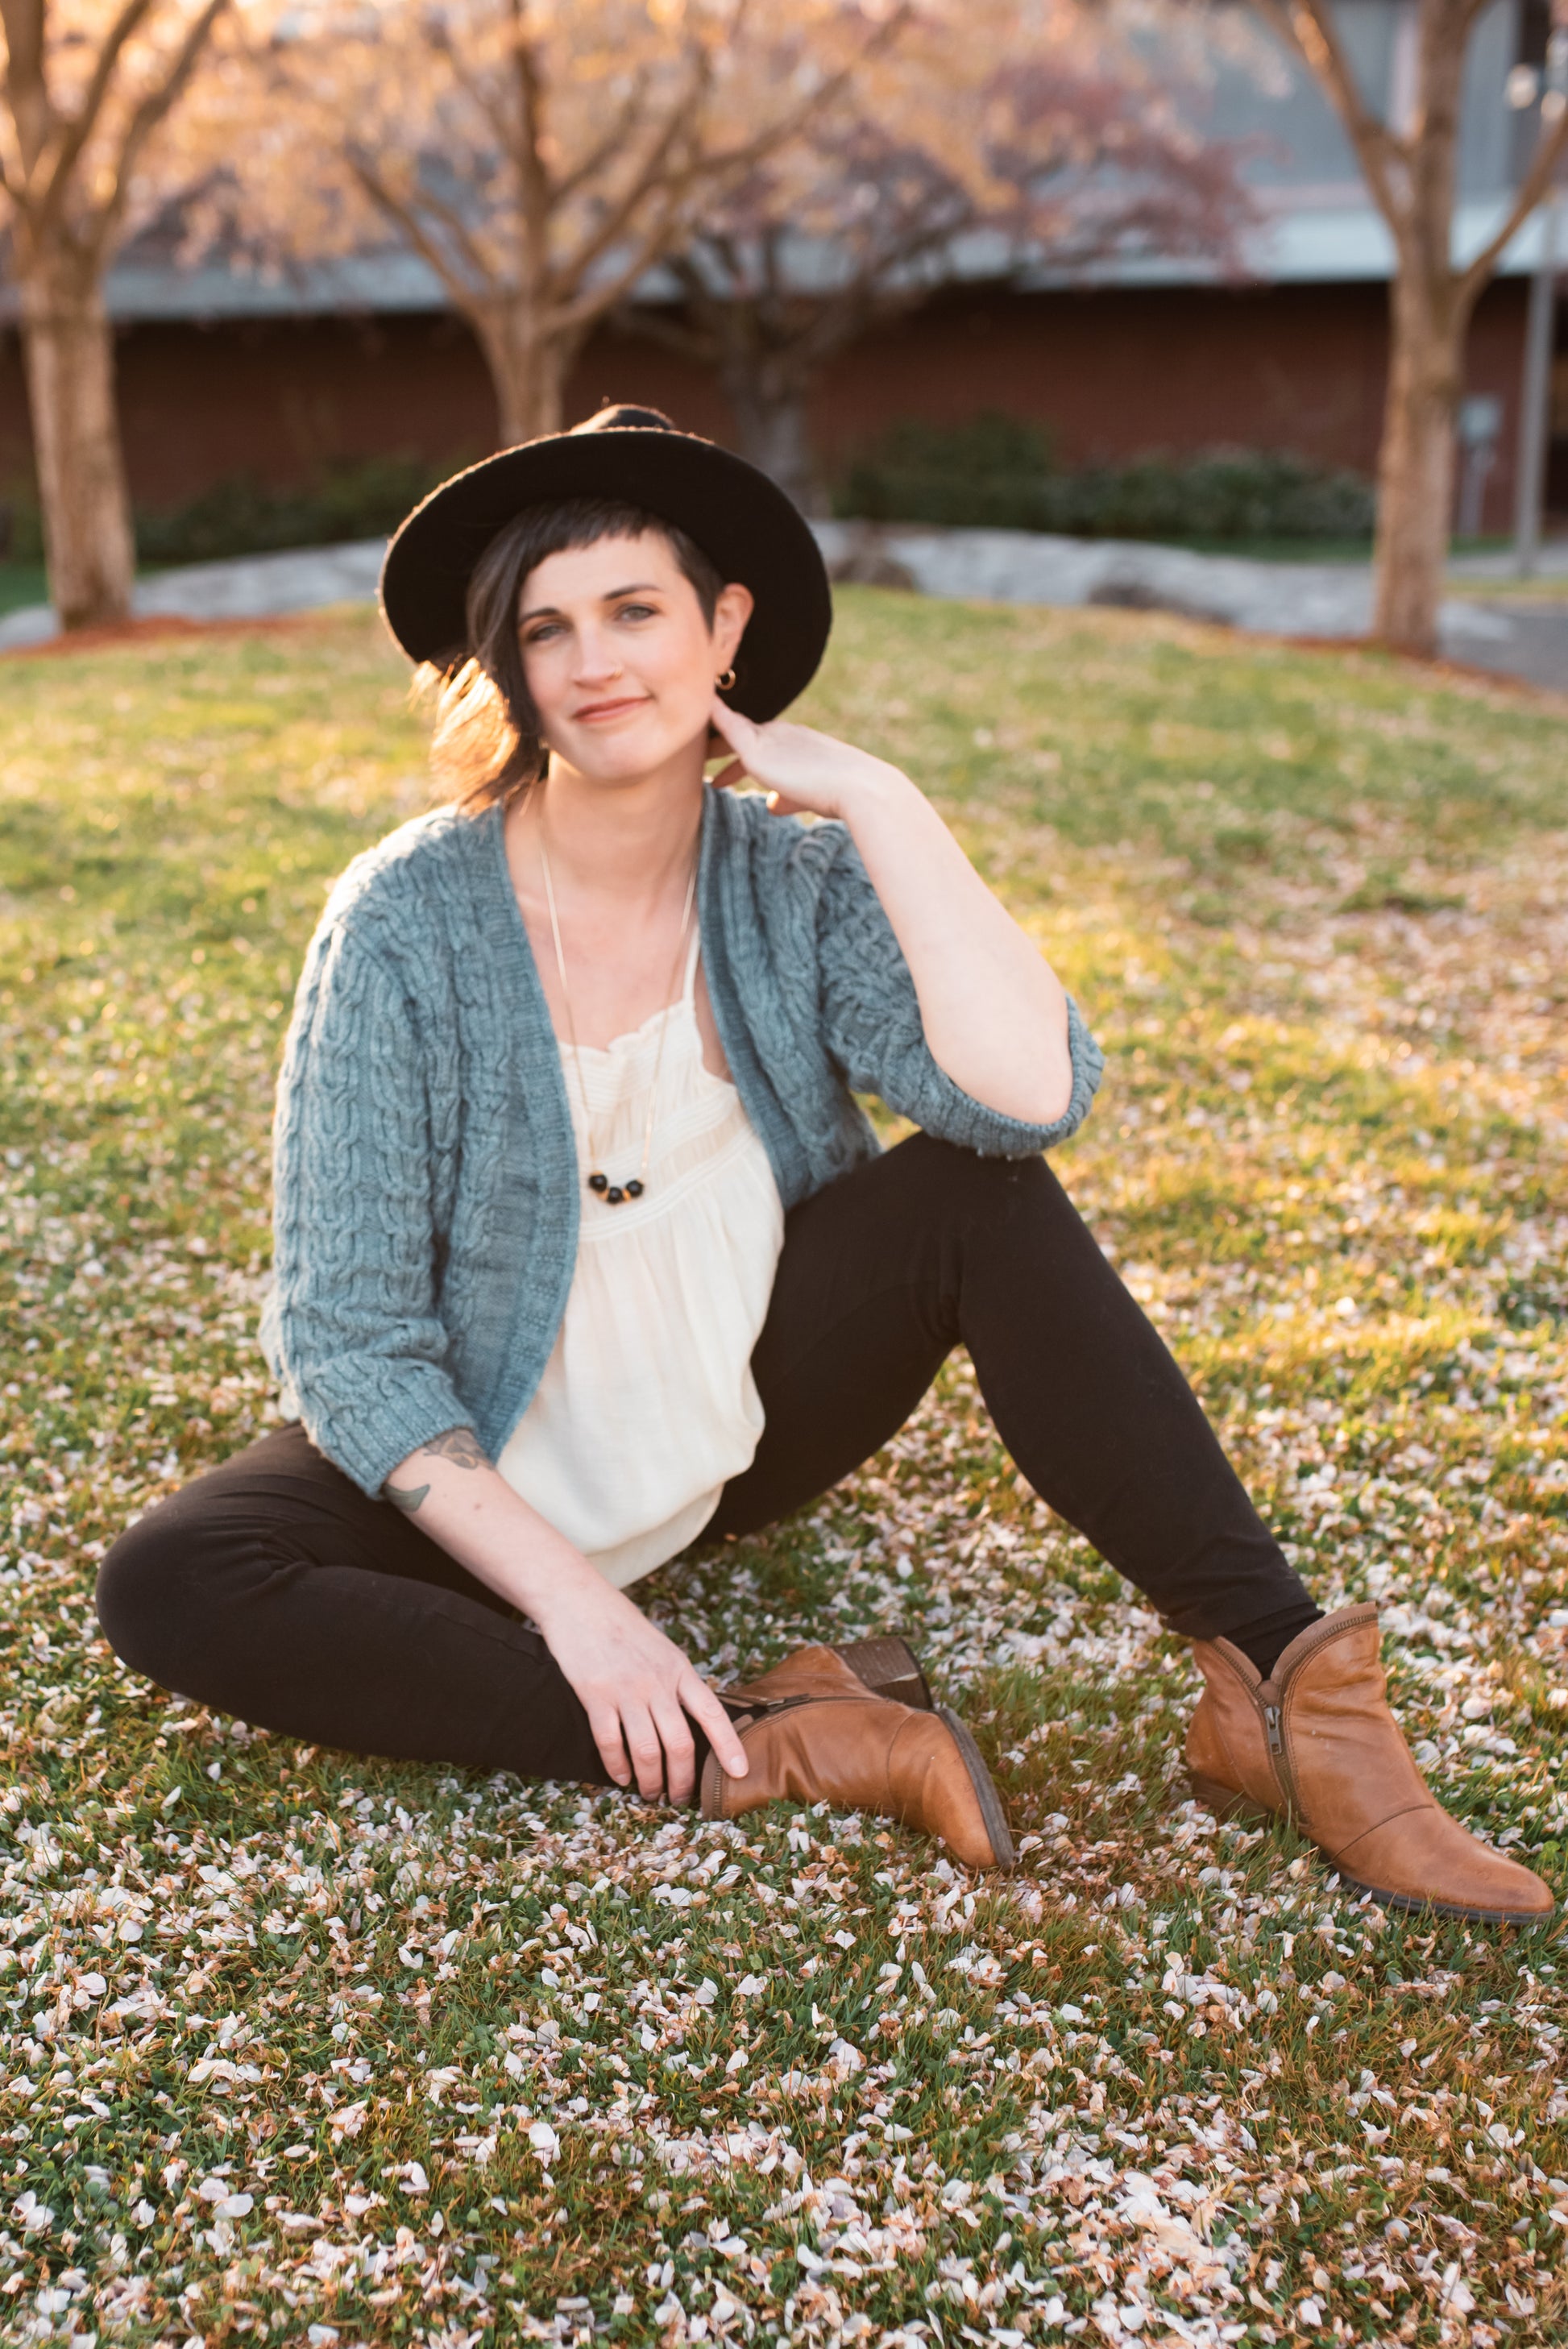 Sitting on the ground, Jen smiles at the camera, wearing a light blue cardigan knit with three quarter length sleeves over a white tank top.